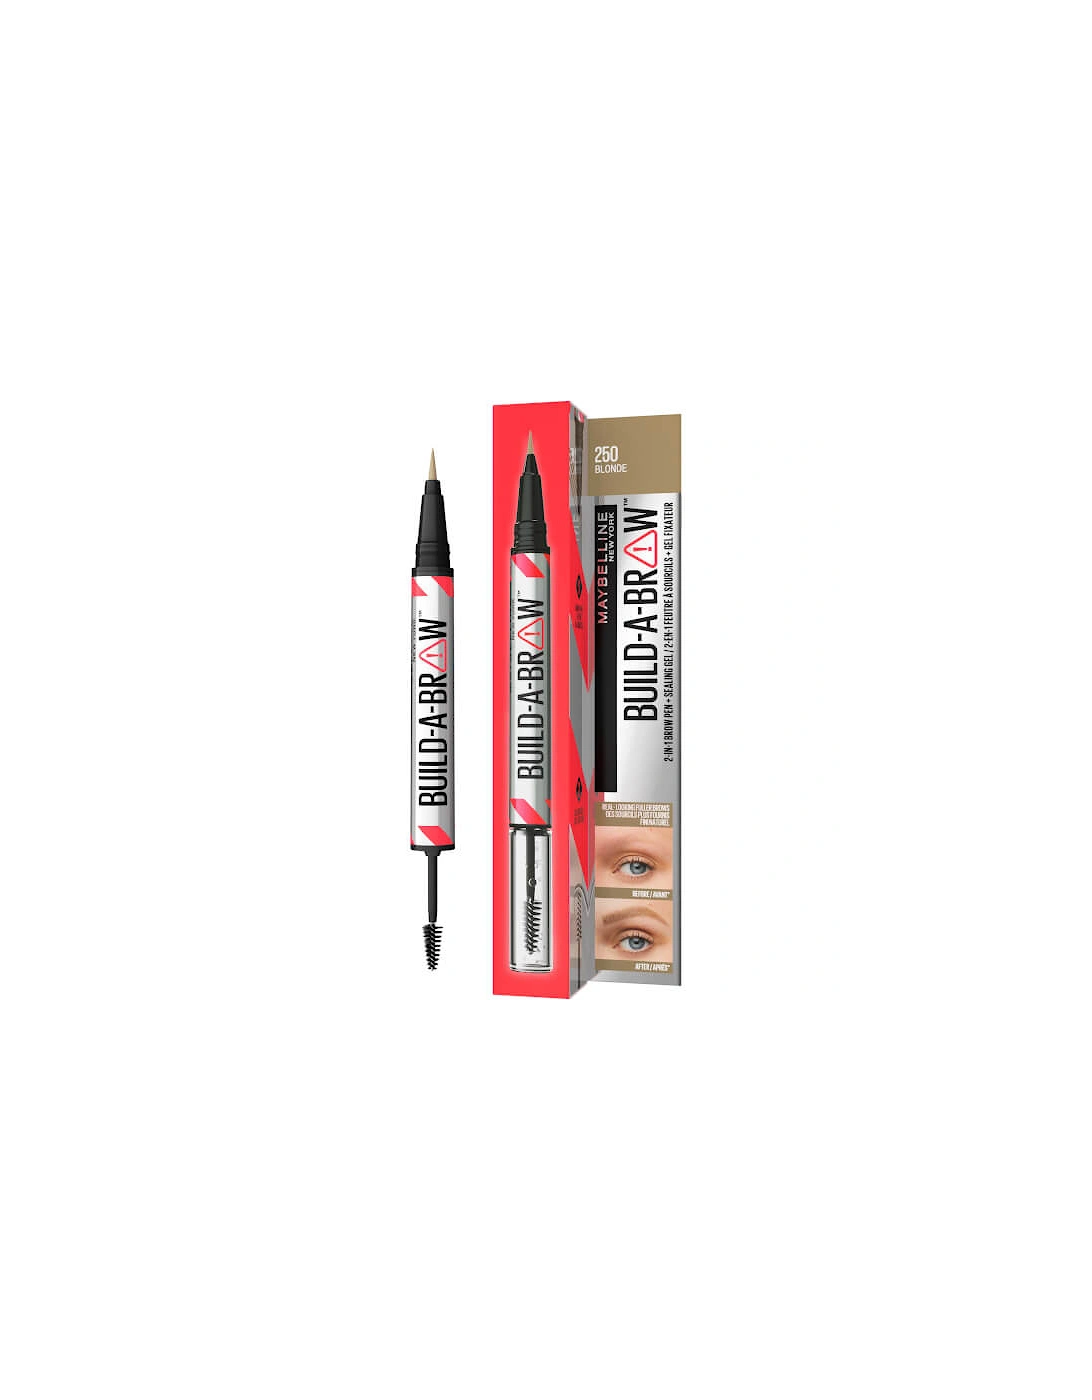 Build-A-Brow 2 Easy Steps Eye Brow Pencil and Gel - Blonde, 2 of 1